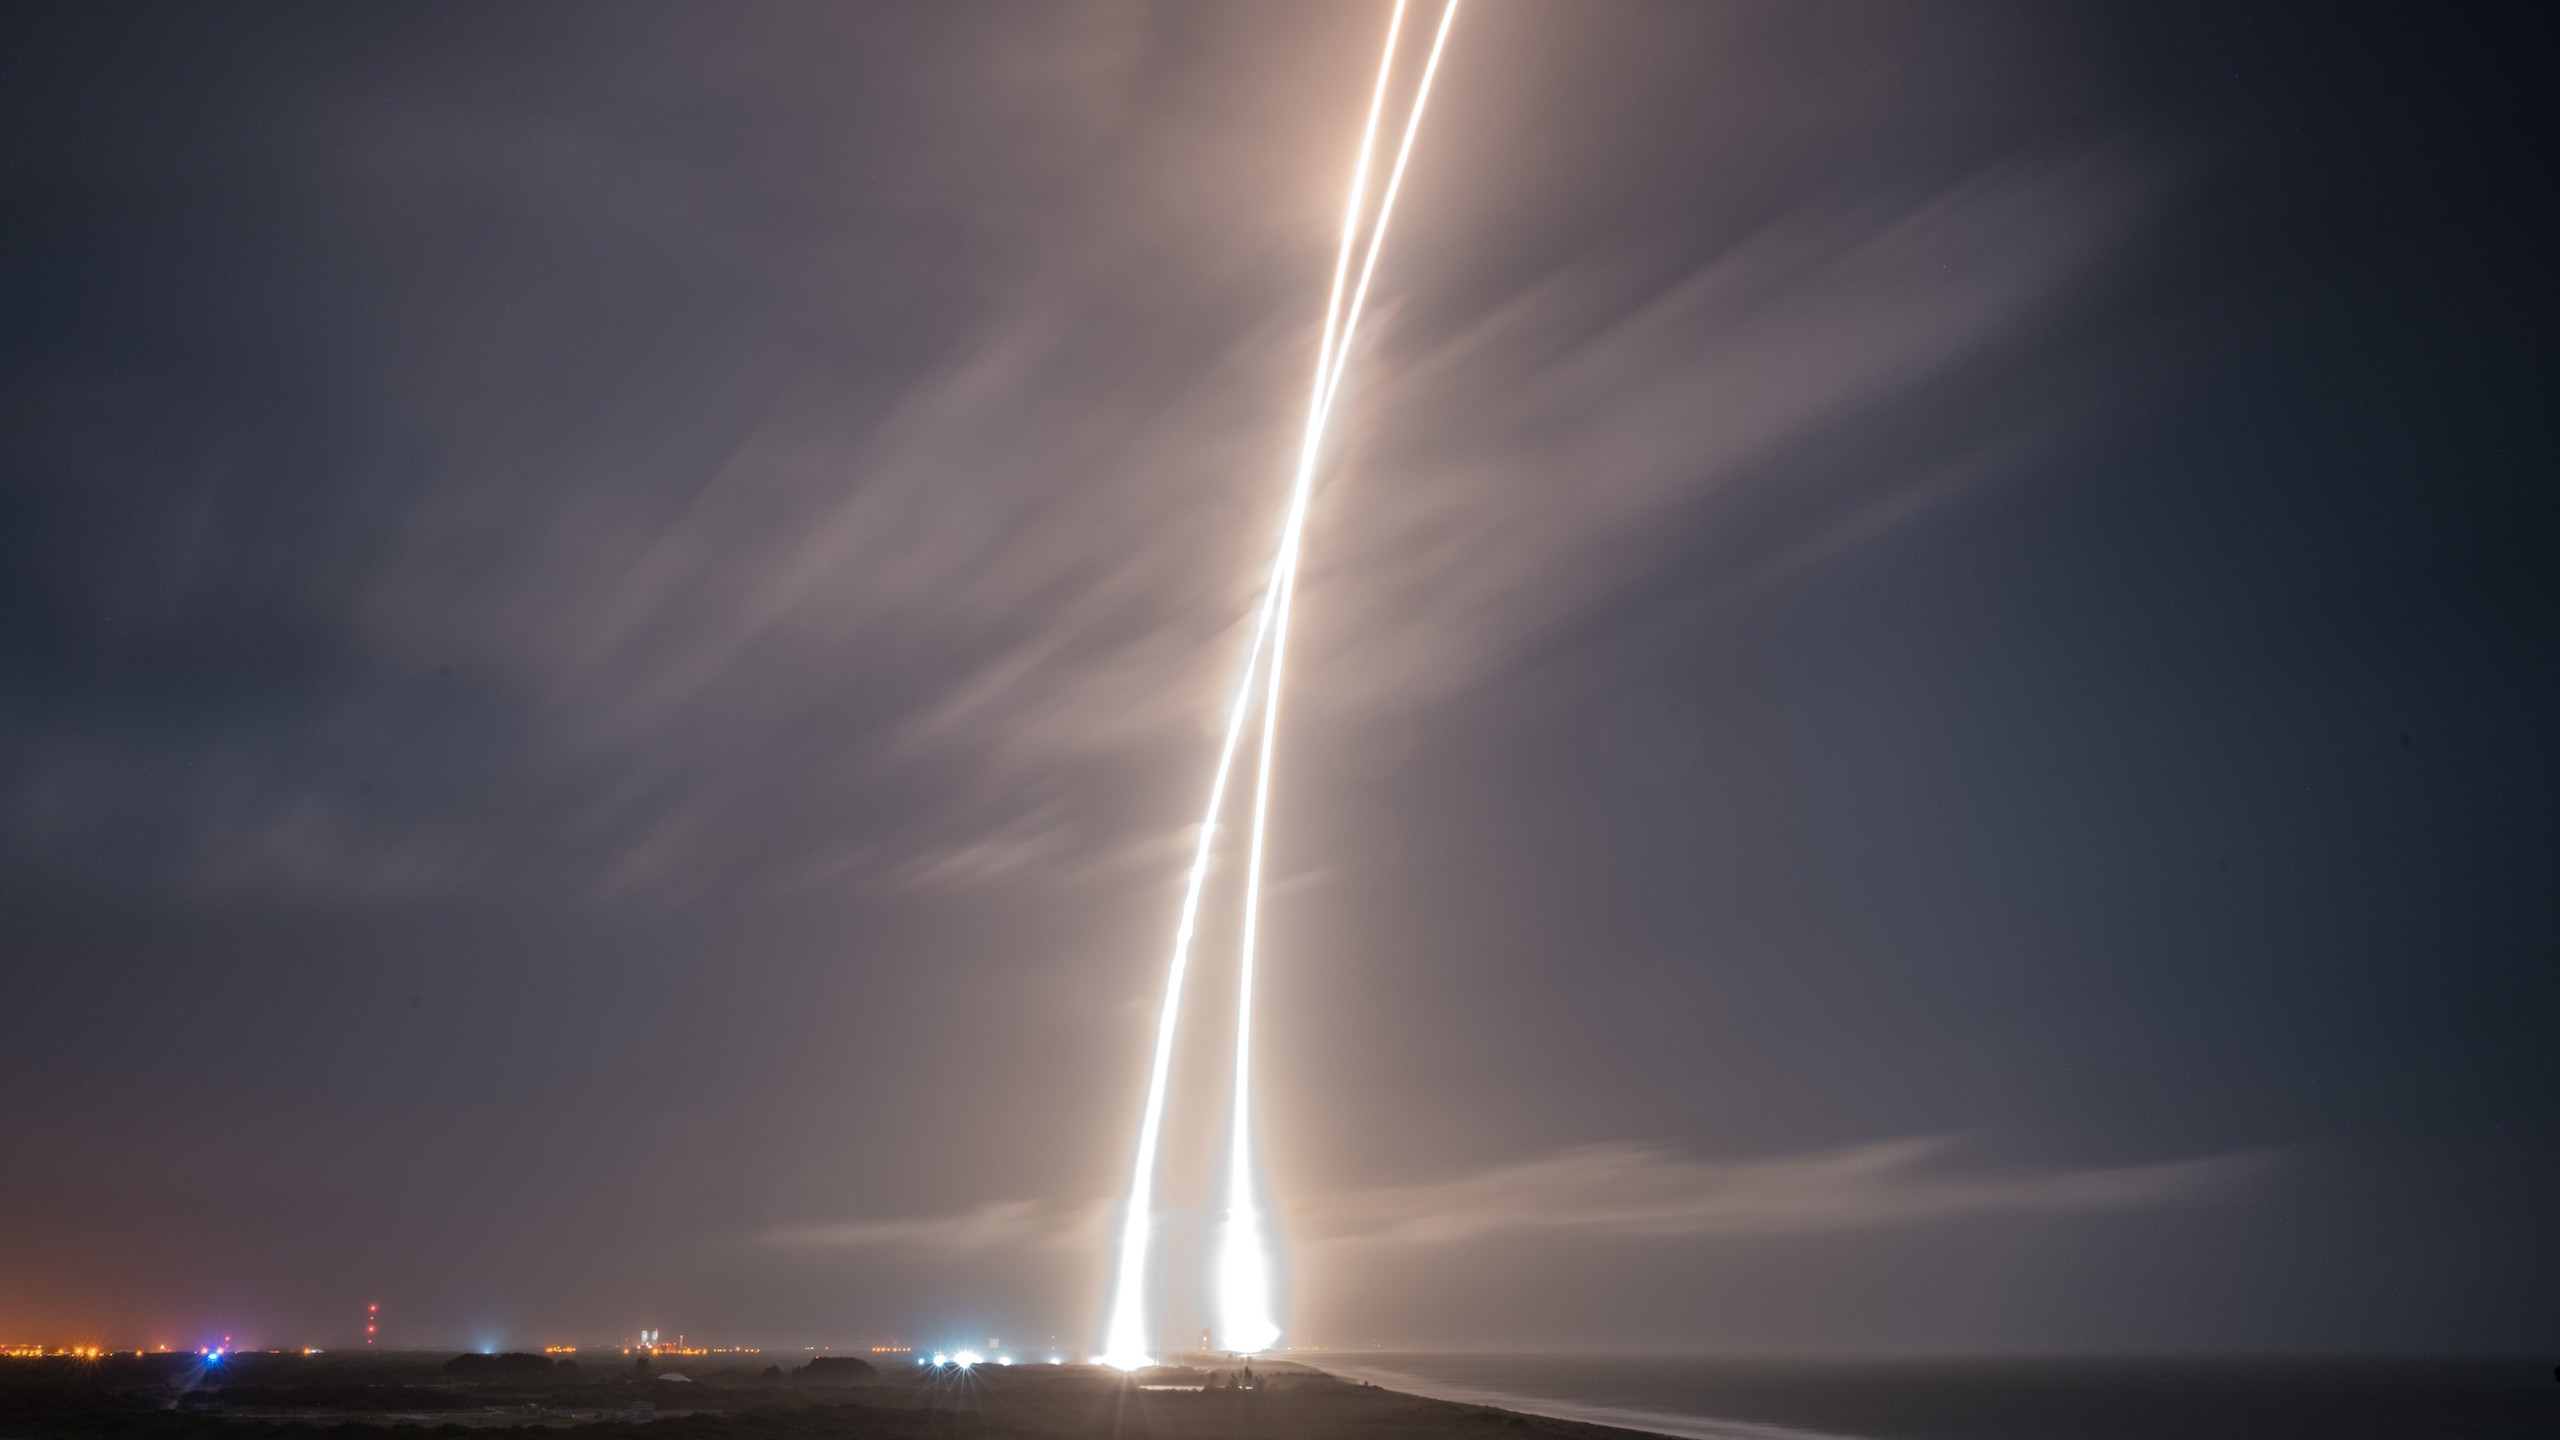 2560x1440 SpaceX's launch and landing of Falcon9 rocket [] (1080p in  comments) | Top reddit wallpapers | Pinterest